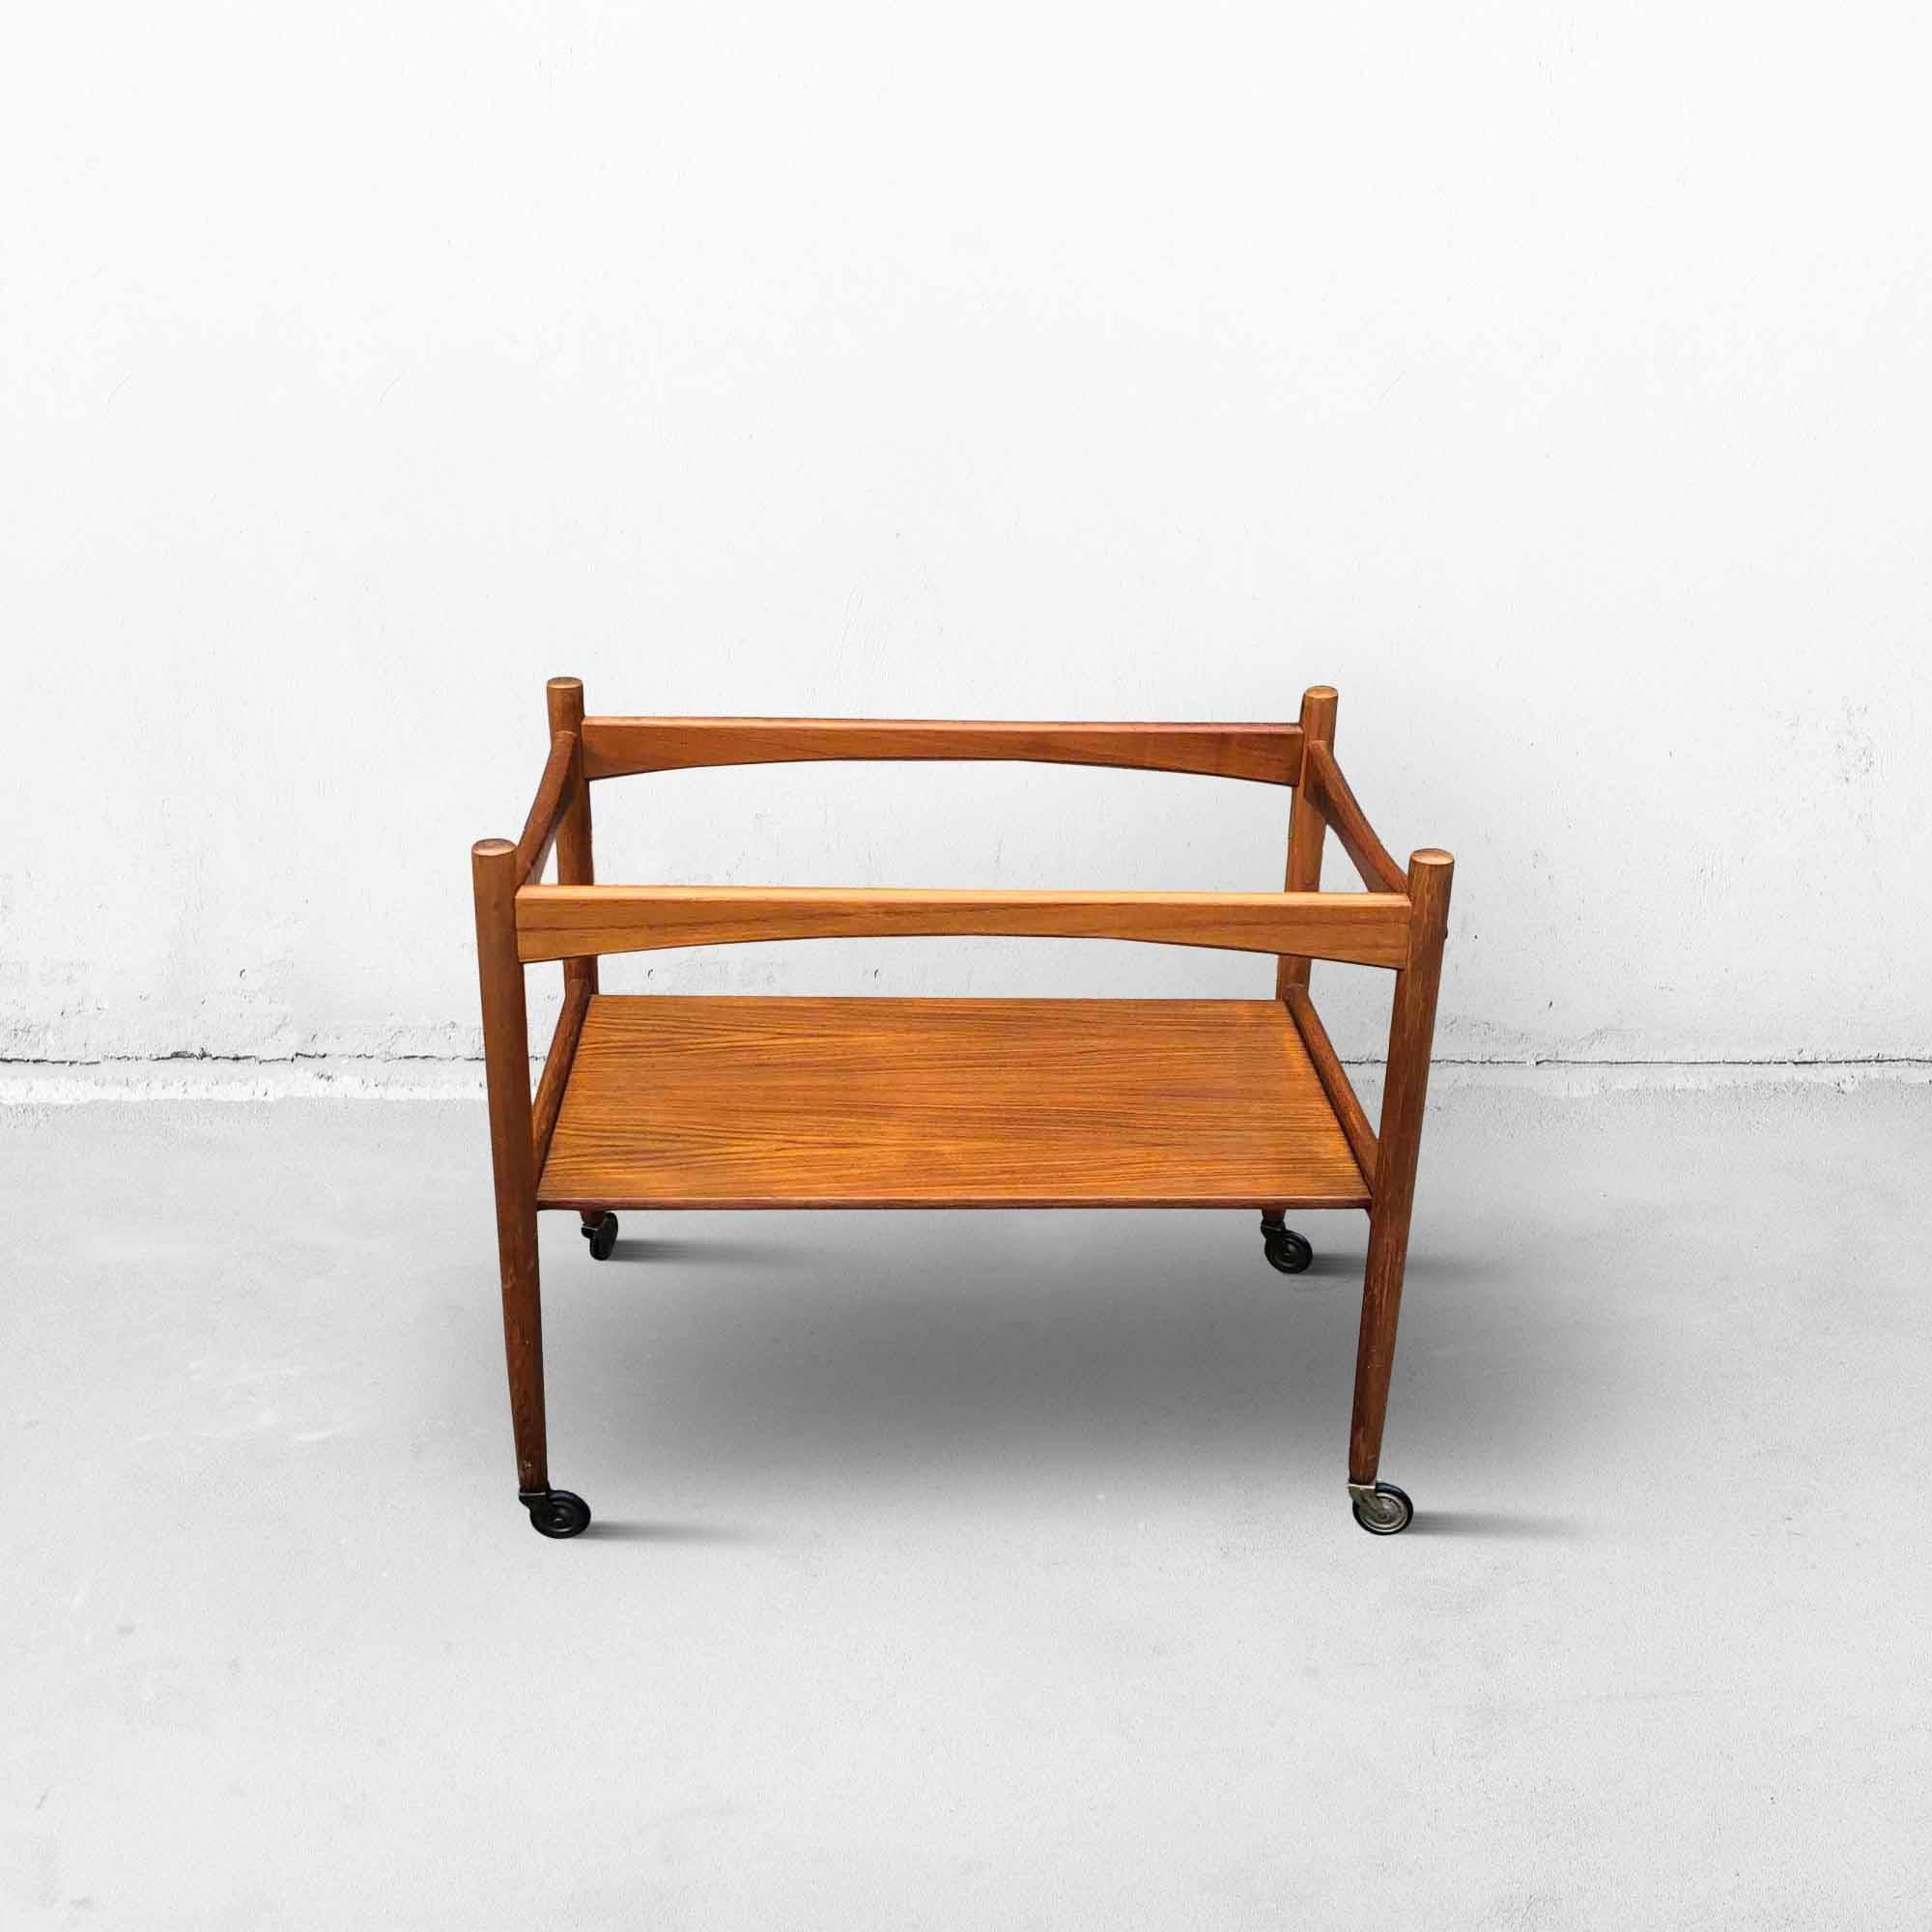 Teak Mid-Century Danish Serving Trolley with Removable Tray by Poul Hundevad, 1960s